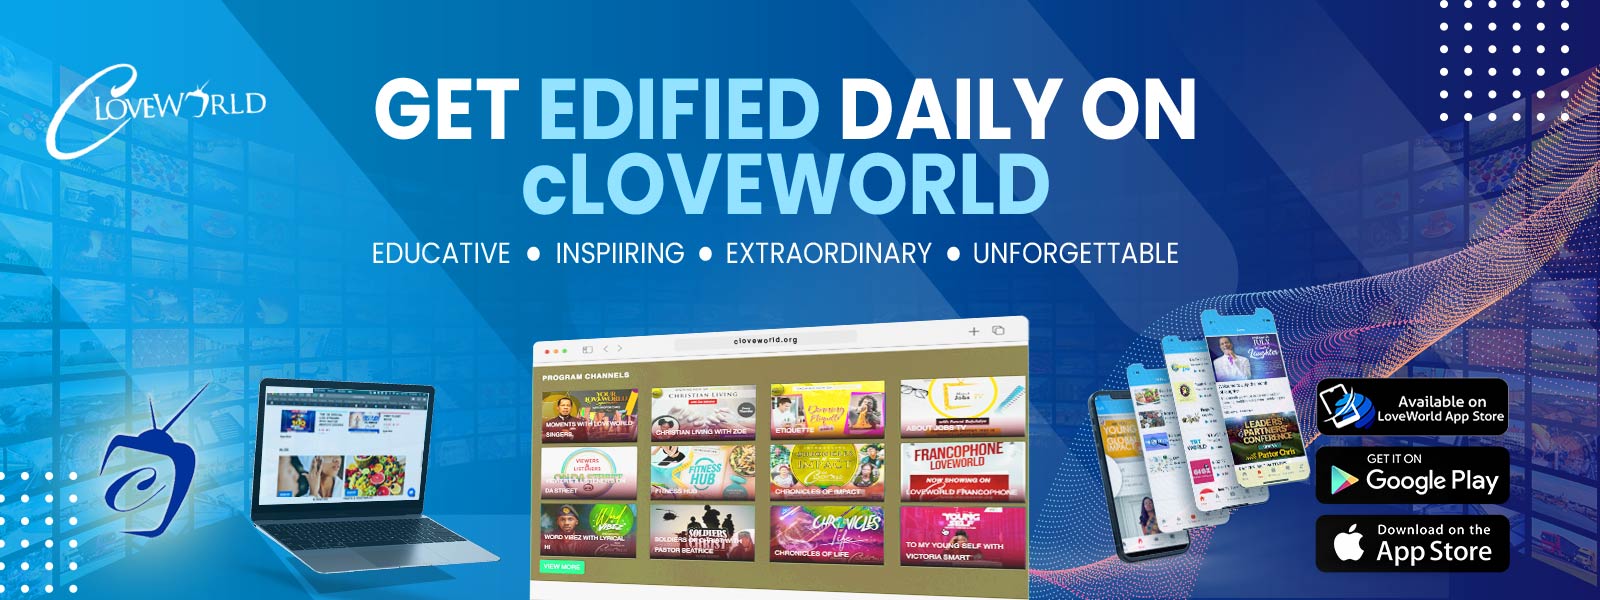 GET EDIFIED DAILY ON cLOVEWORLD